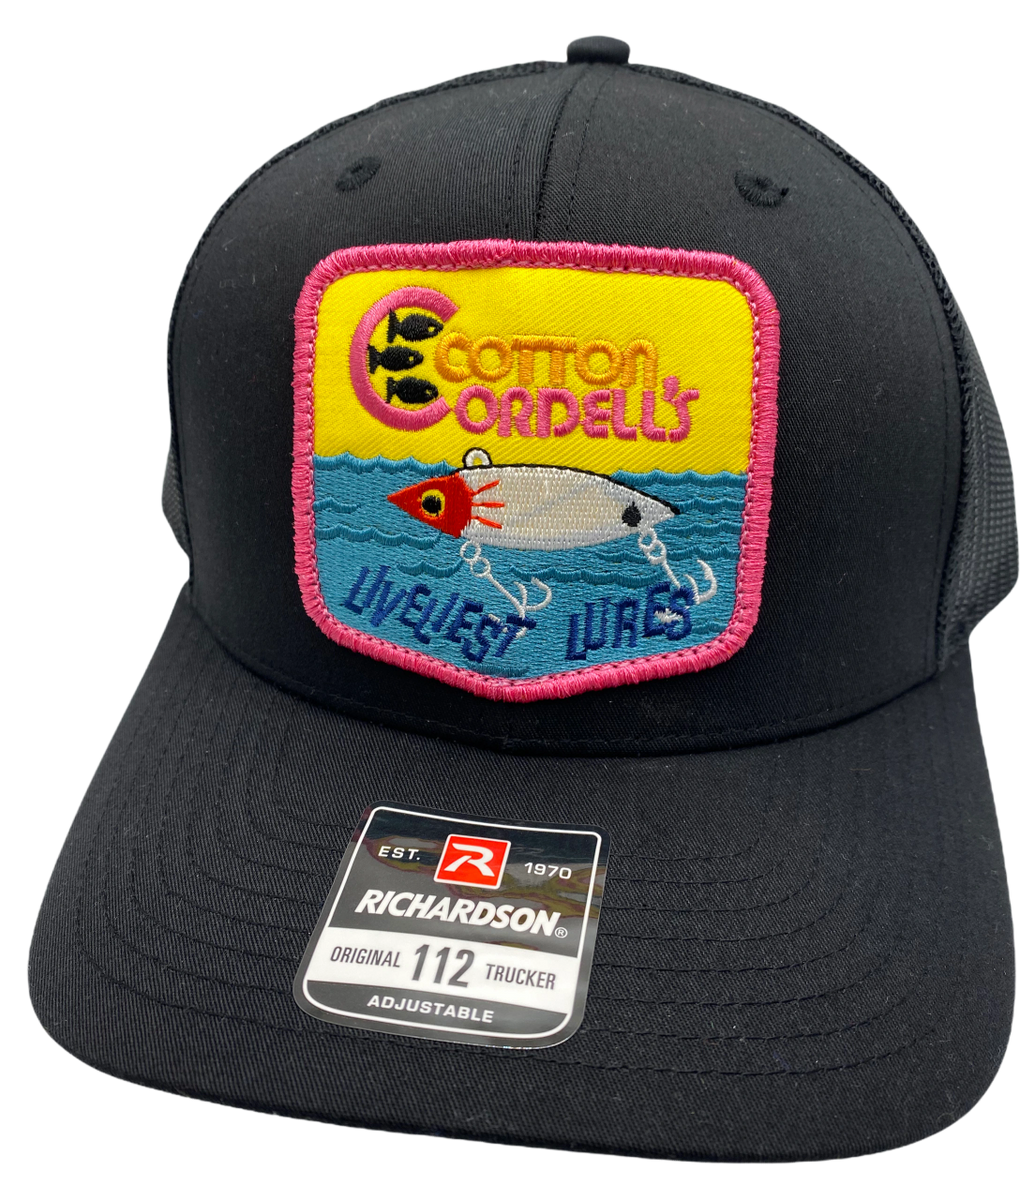 Cotton Cordell's Lures Fishing Hat